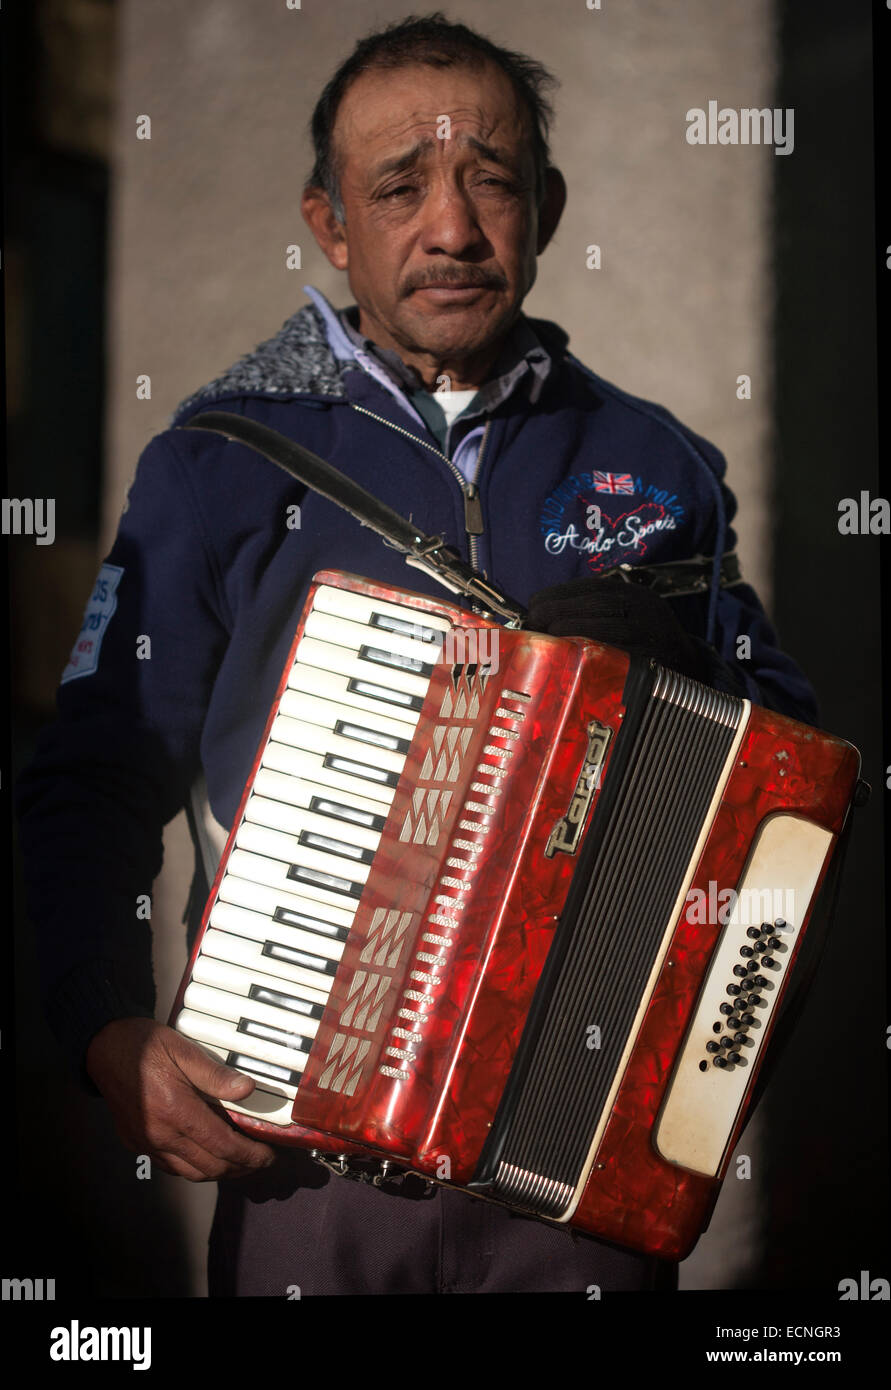 An accordionist poses during the annual pilgrimage to the Basilica of Our Lady of Guadalupe, Tepeyac Hill, Mexico City, Mexico. Stock Photo